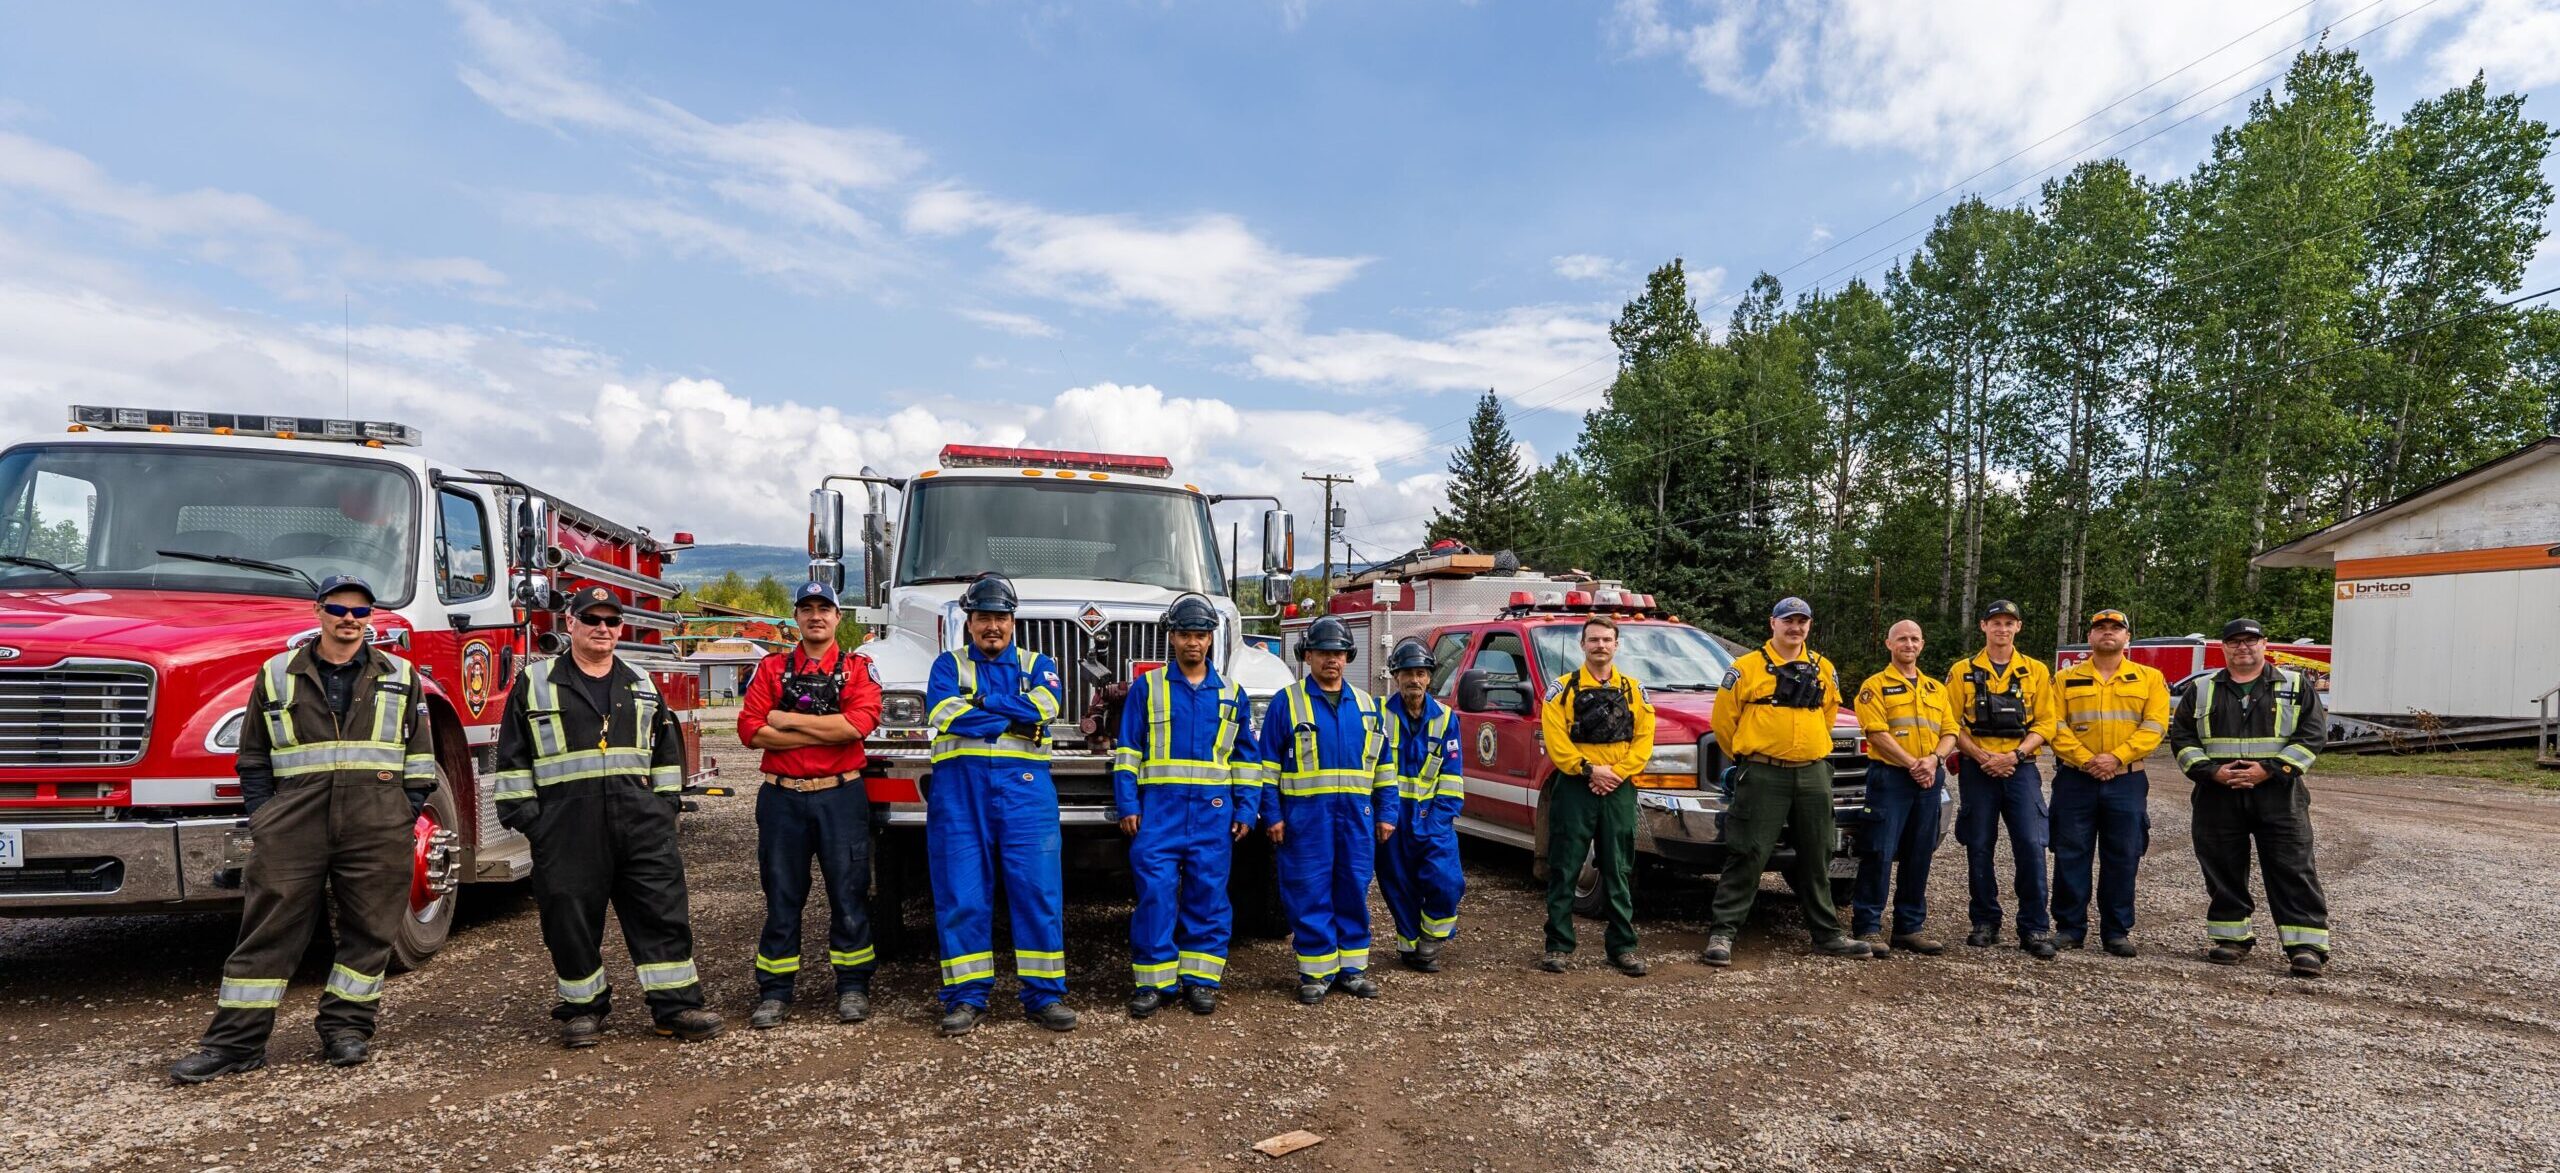 the structural defense task force standing outside their firefighting vehicles